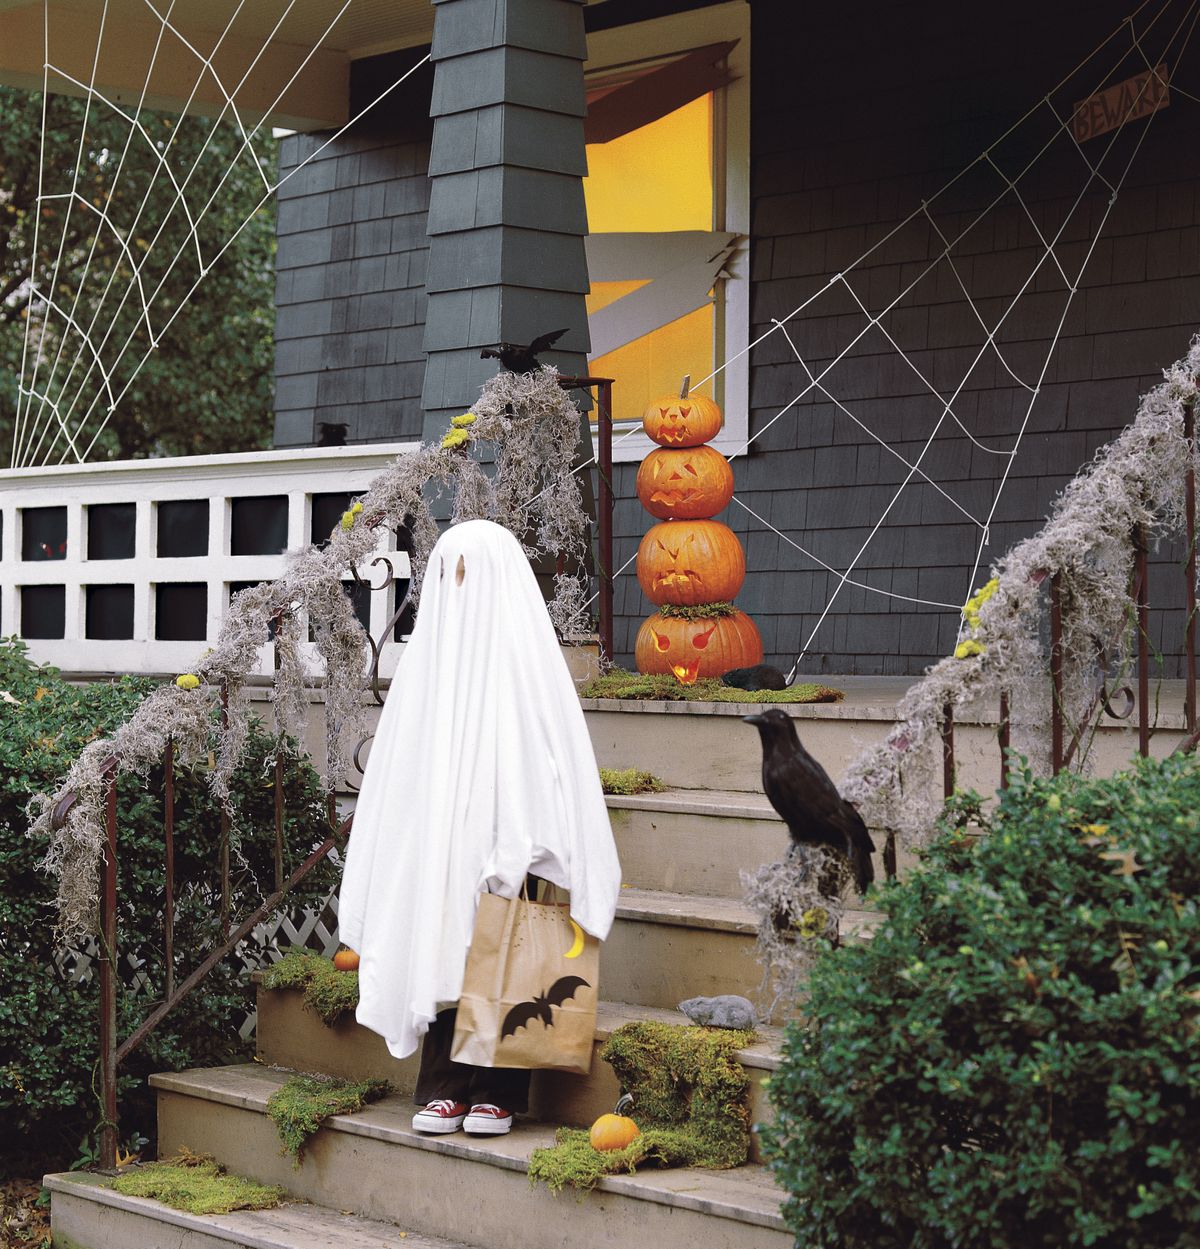 William Waldron shows the front of a home decorated for Halloween. This photo was originally published in the 2011 Martha Stewart Halloween Special Issue. (Associated Press)